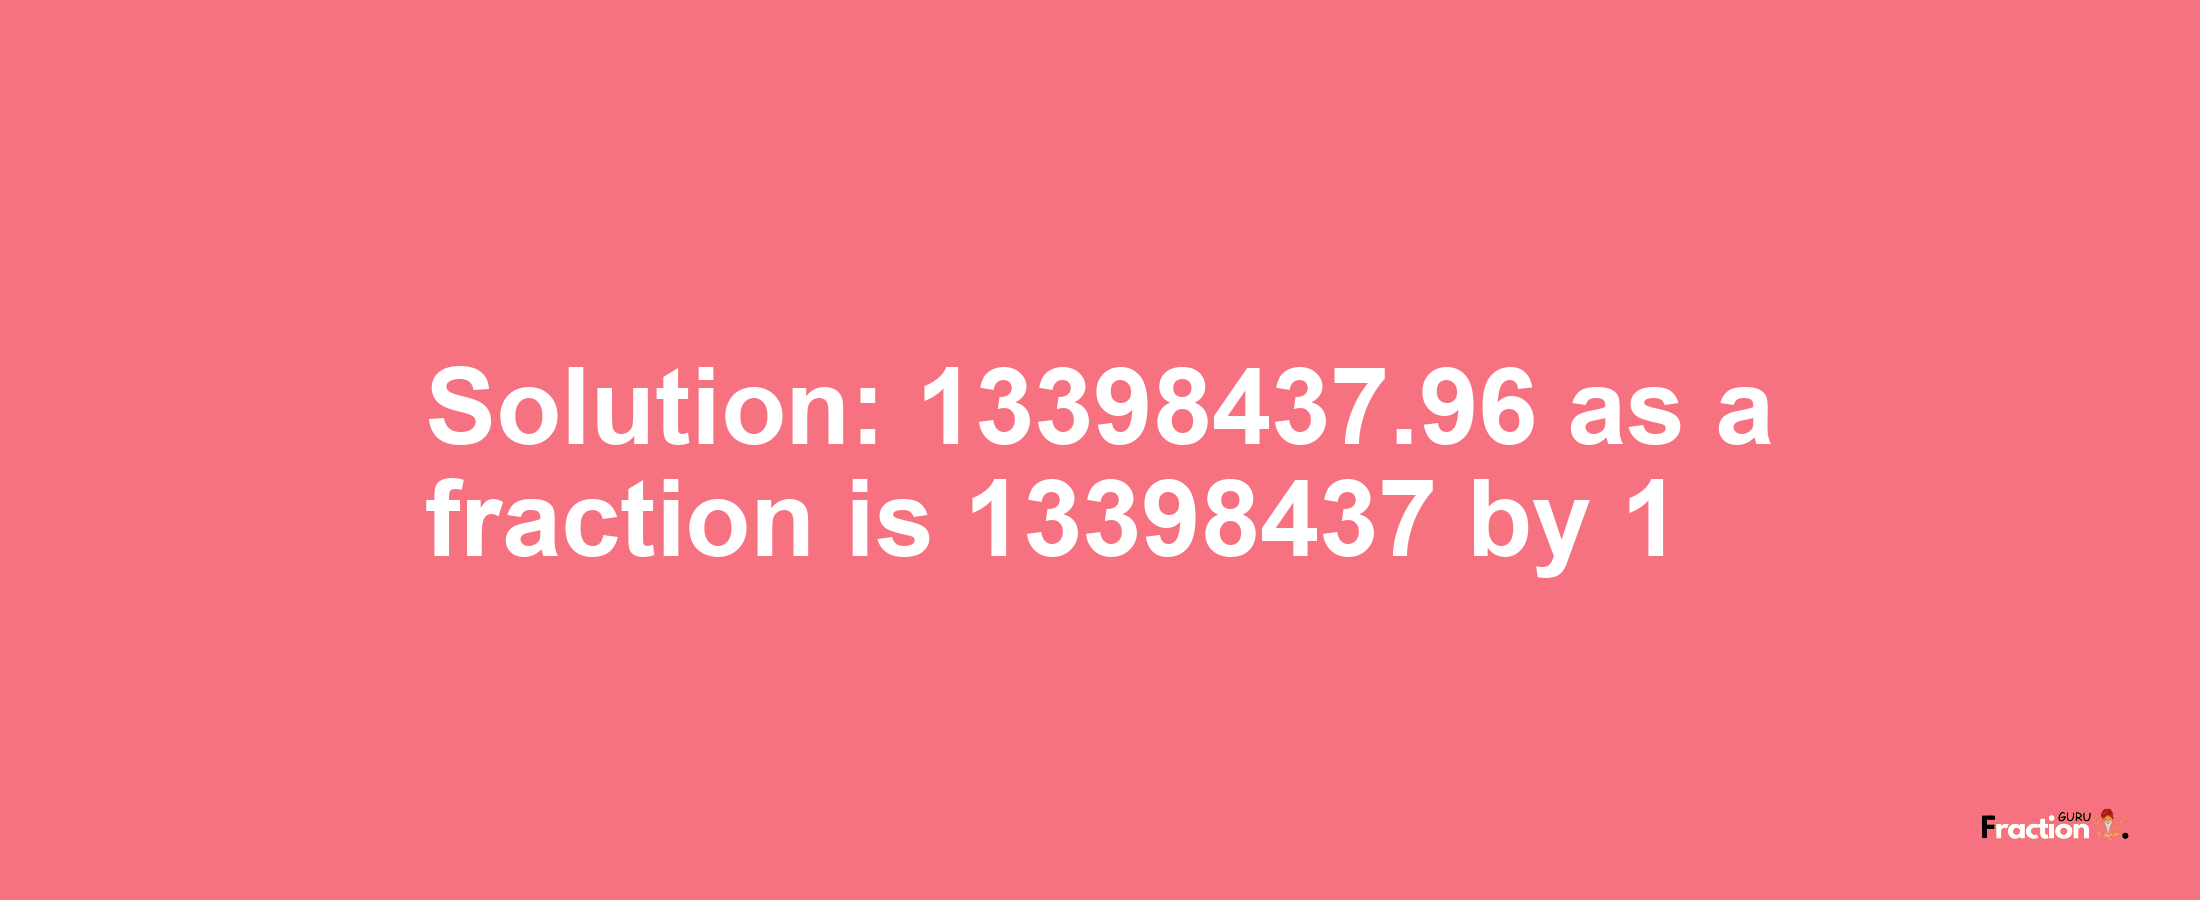 Solution:13398437.96 as a fraction is 13398437/1